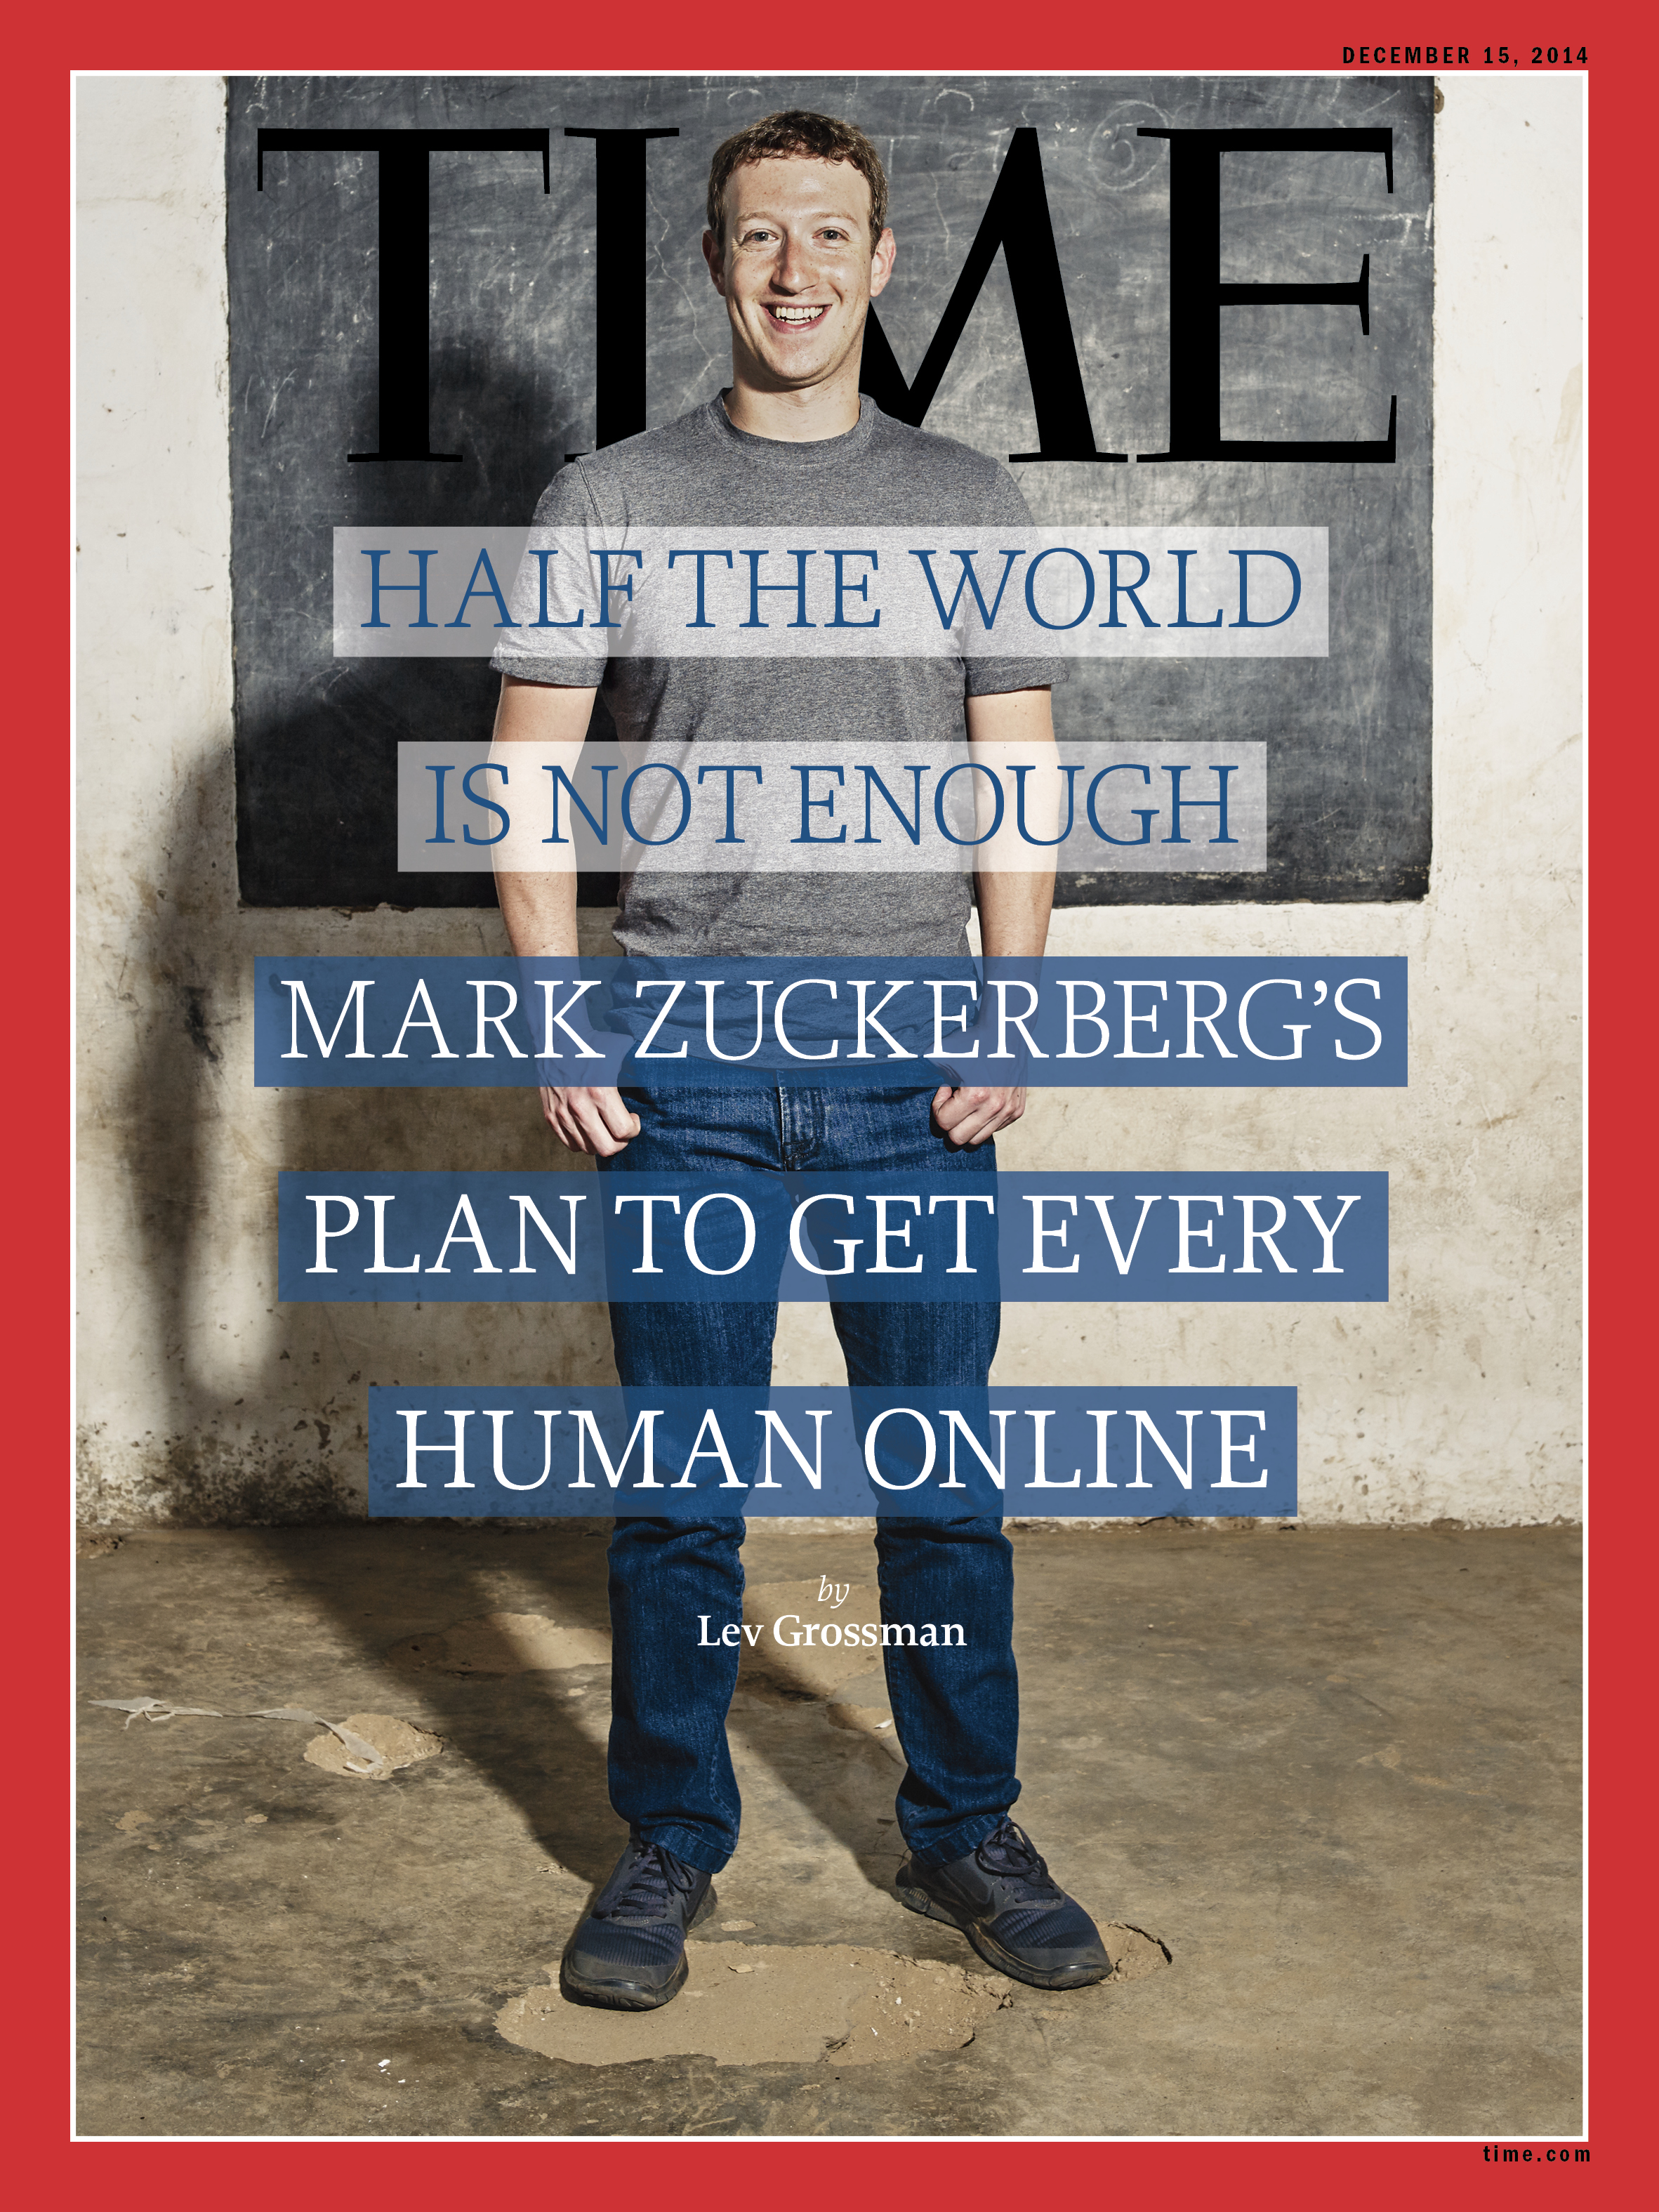 Facebook's Mark Zuckerberg on TIME Magazine's cover (Photograph by Ian Allen for TIME)